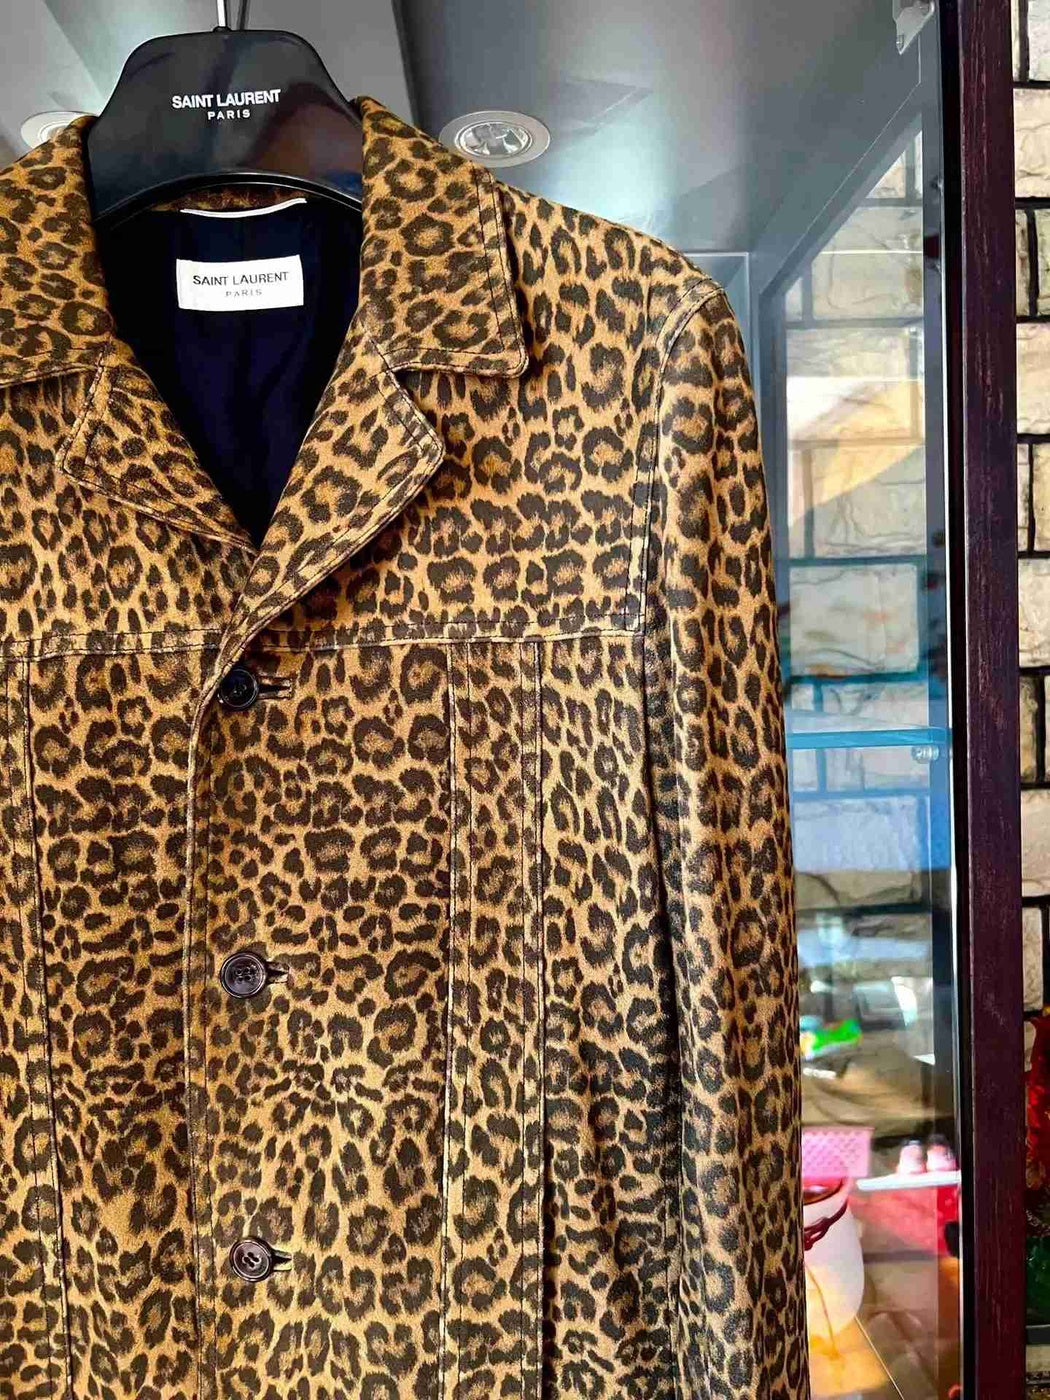 15ss-lamp-skin-leopard-leather-jacket-by-hedi-size-46Men's / US M / EU 48-50 / 2YellowGently Used in Yellow, Men's / US M / EU 48-50 / 2,Gently Used